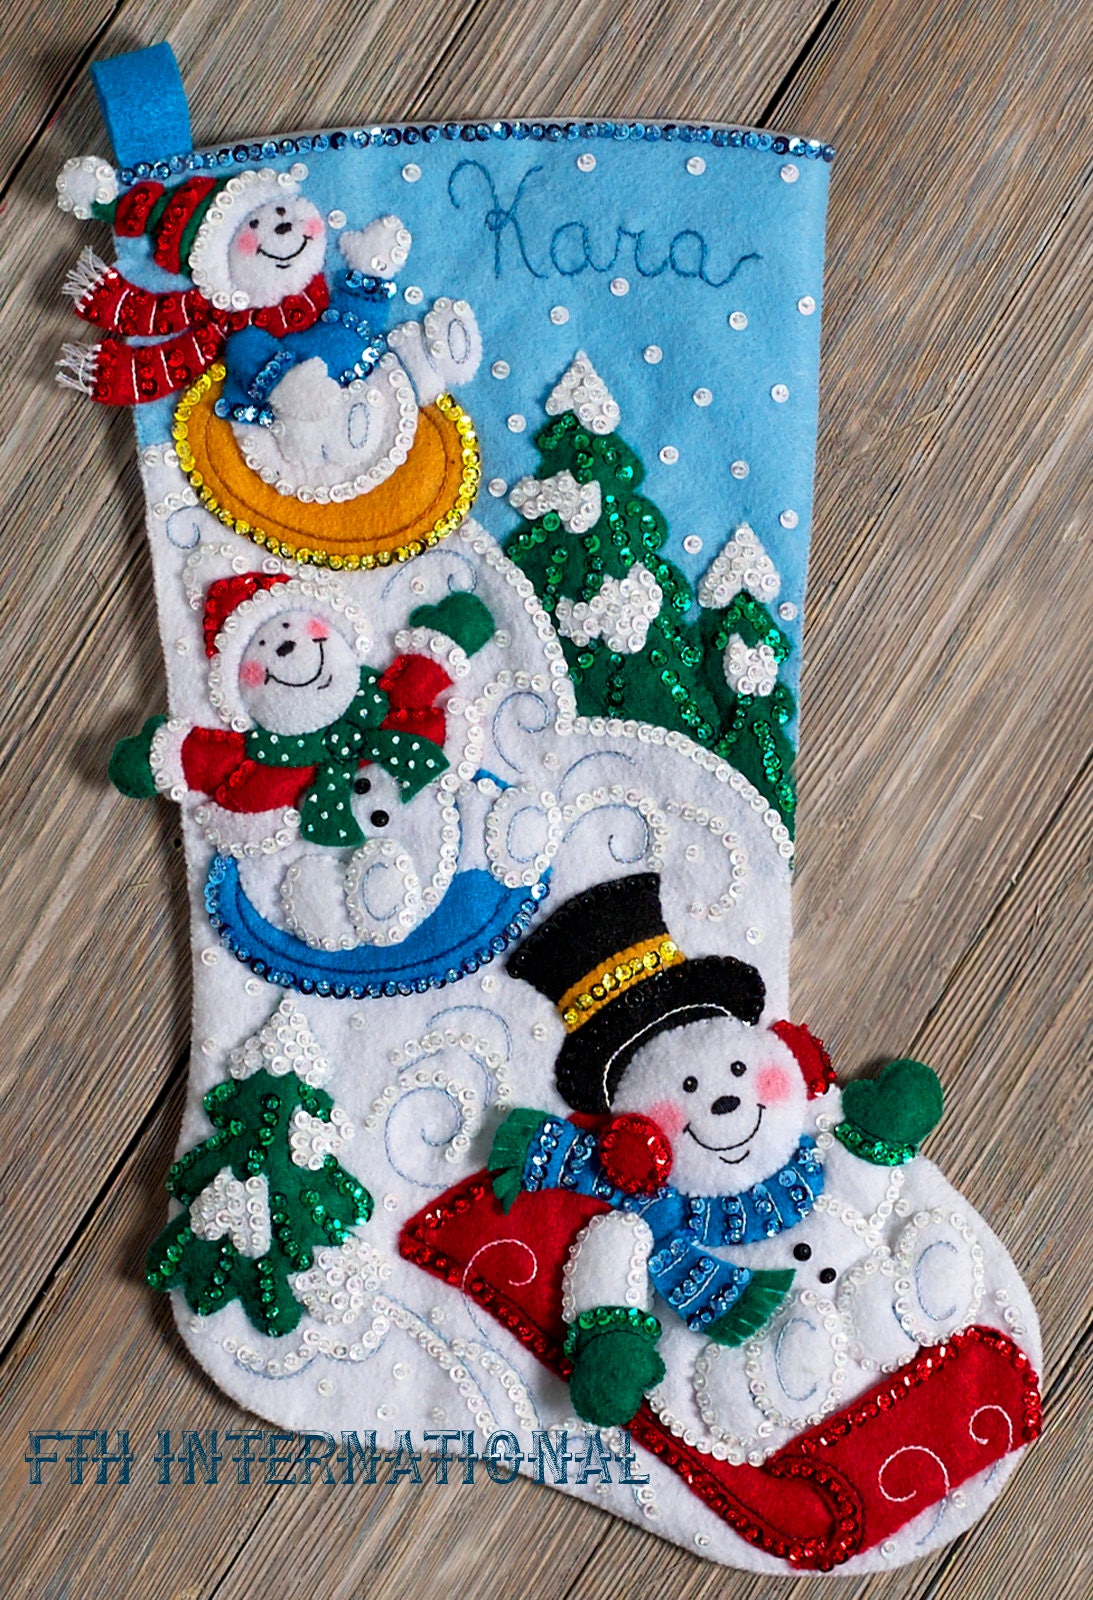 85174 Bucilla Felt Christmas Stocking KIT: Teddy with Ornaments Size:  45.7cm Made in USA Kit Includes: Stamped Felts, Cotton Floss, Metallic  Thread, Colour Separated Sequins and Beads, 2 needles, tri-lingual  Instructions, directions